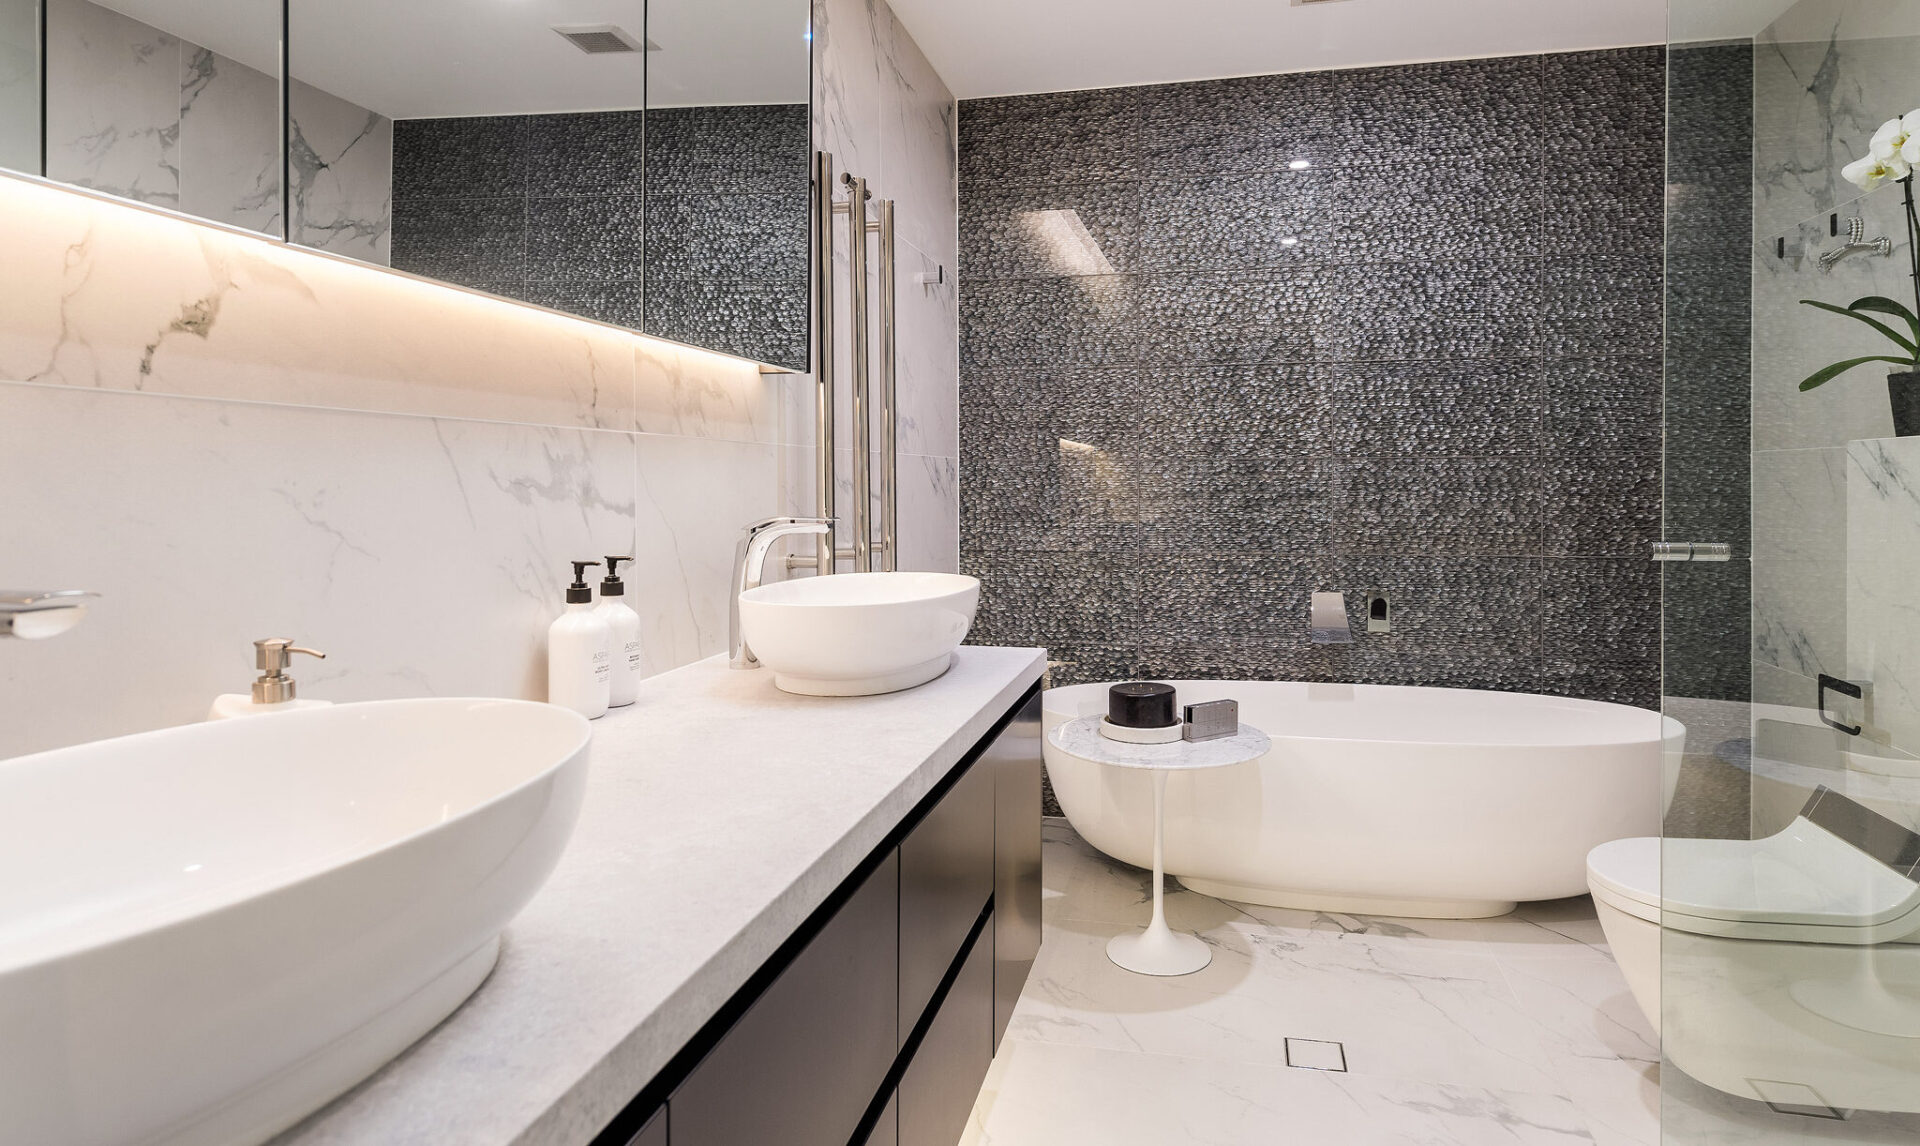 Choose Inhaus Living for a Beautiful and Functional New Bathroom